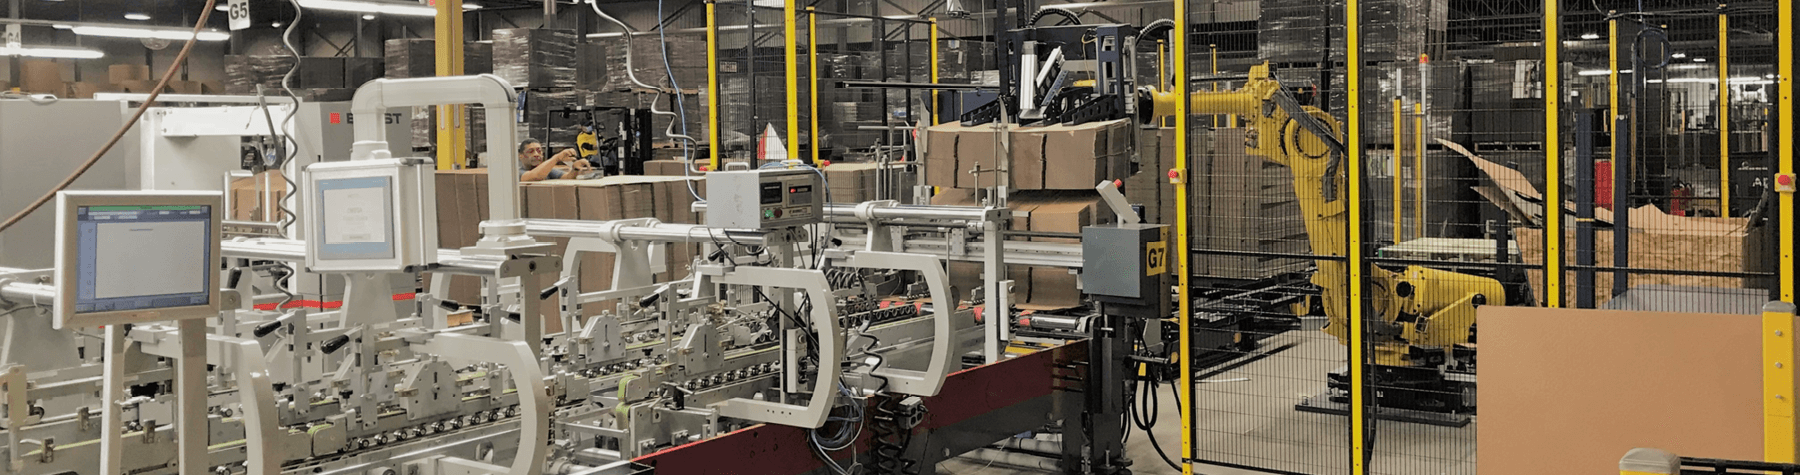 First of Its Kind: Folder-Gluer Prefeeder Robot Installed at Accurate Box Company